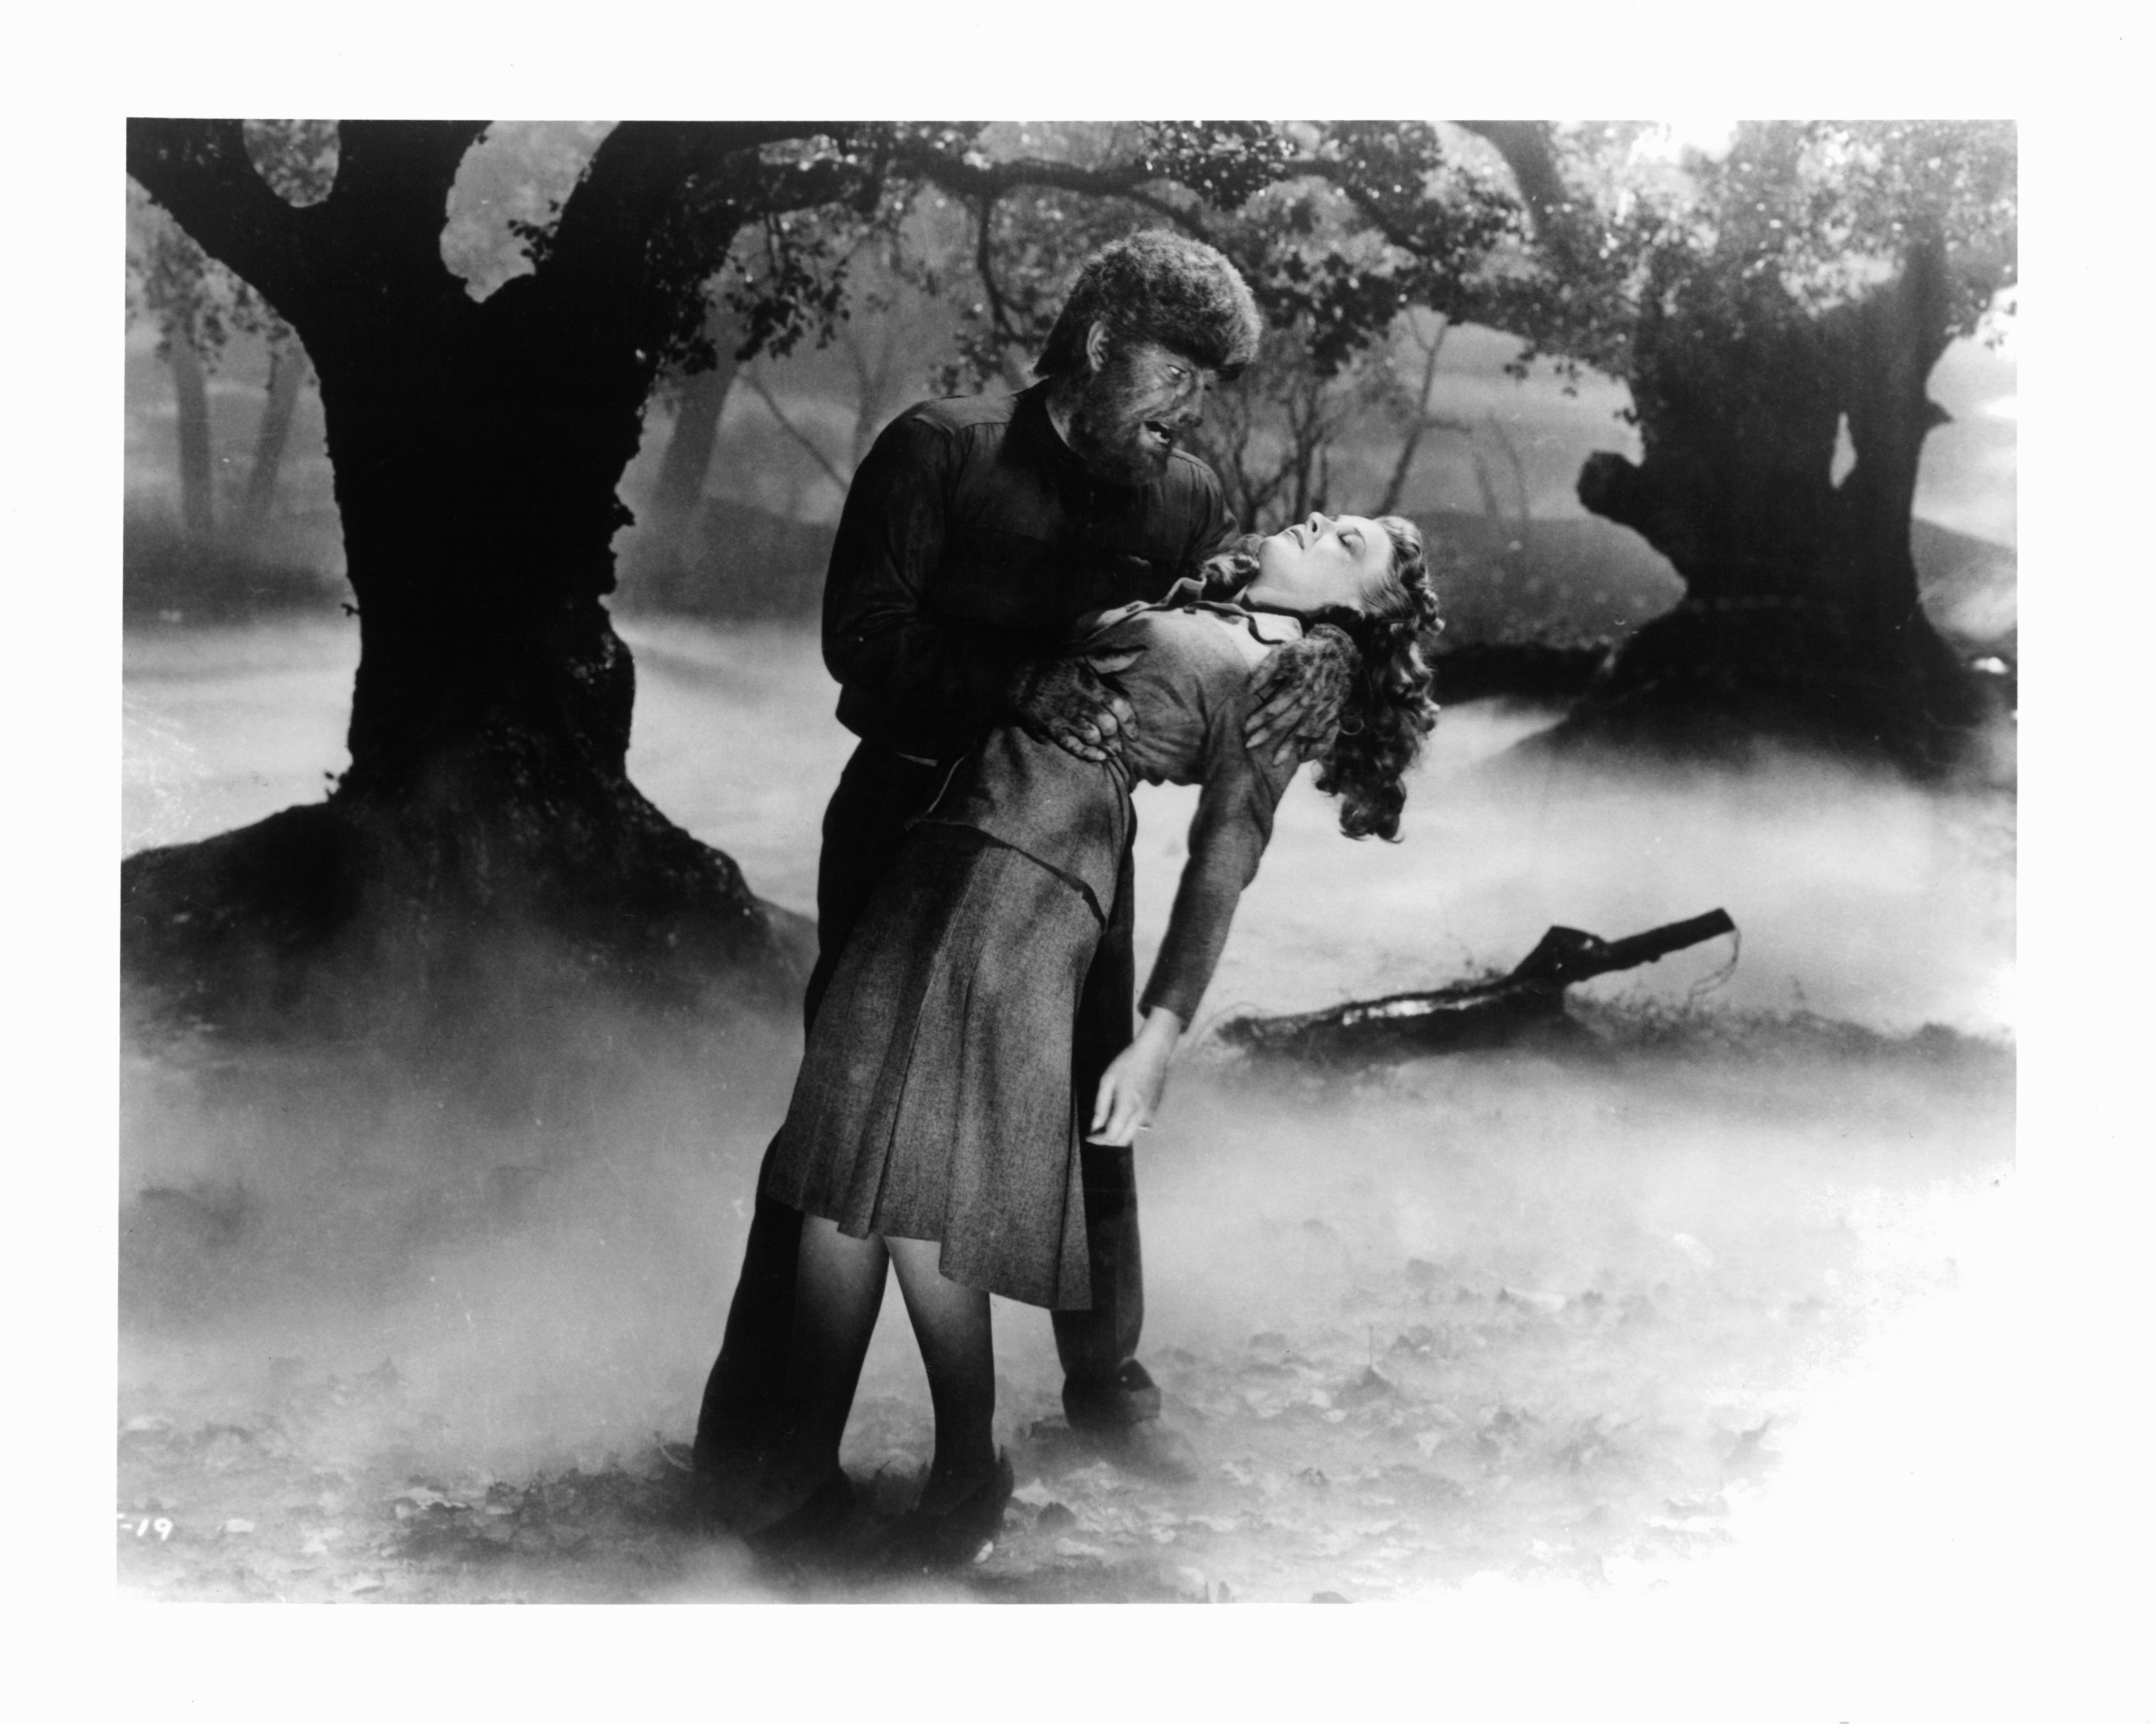 Still of Lon Chaney Jr. and Evelyn Ankers in The Wolf Man (1941)